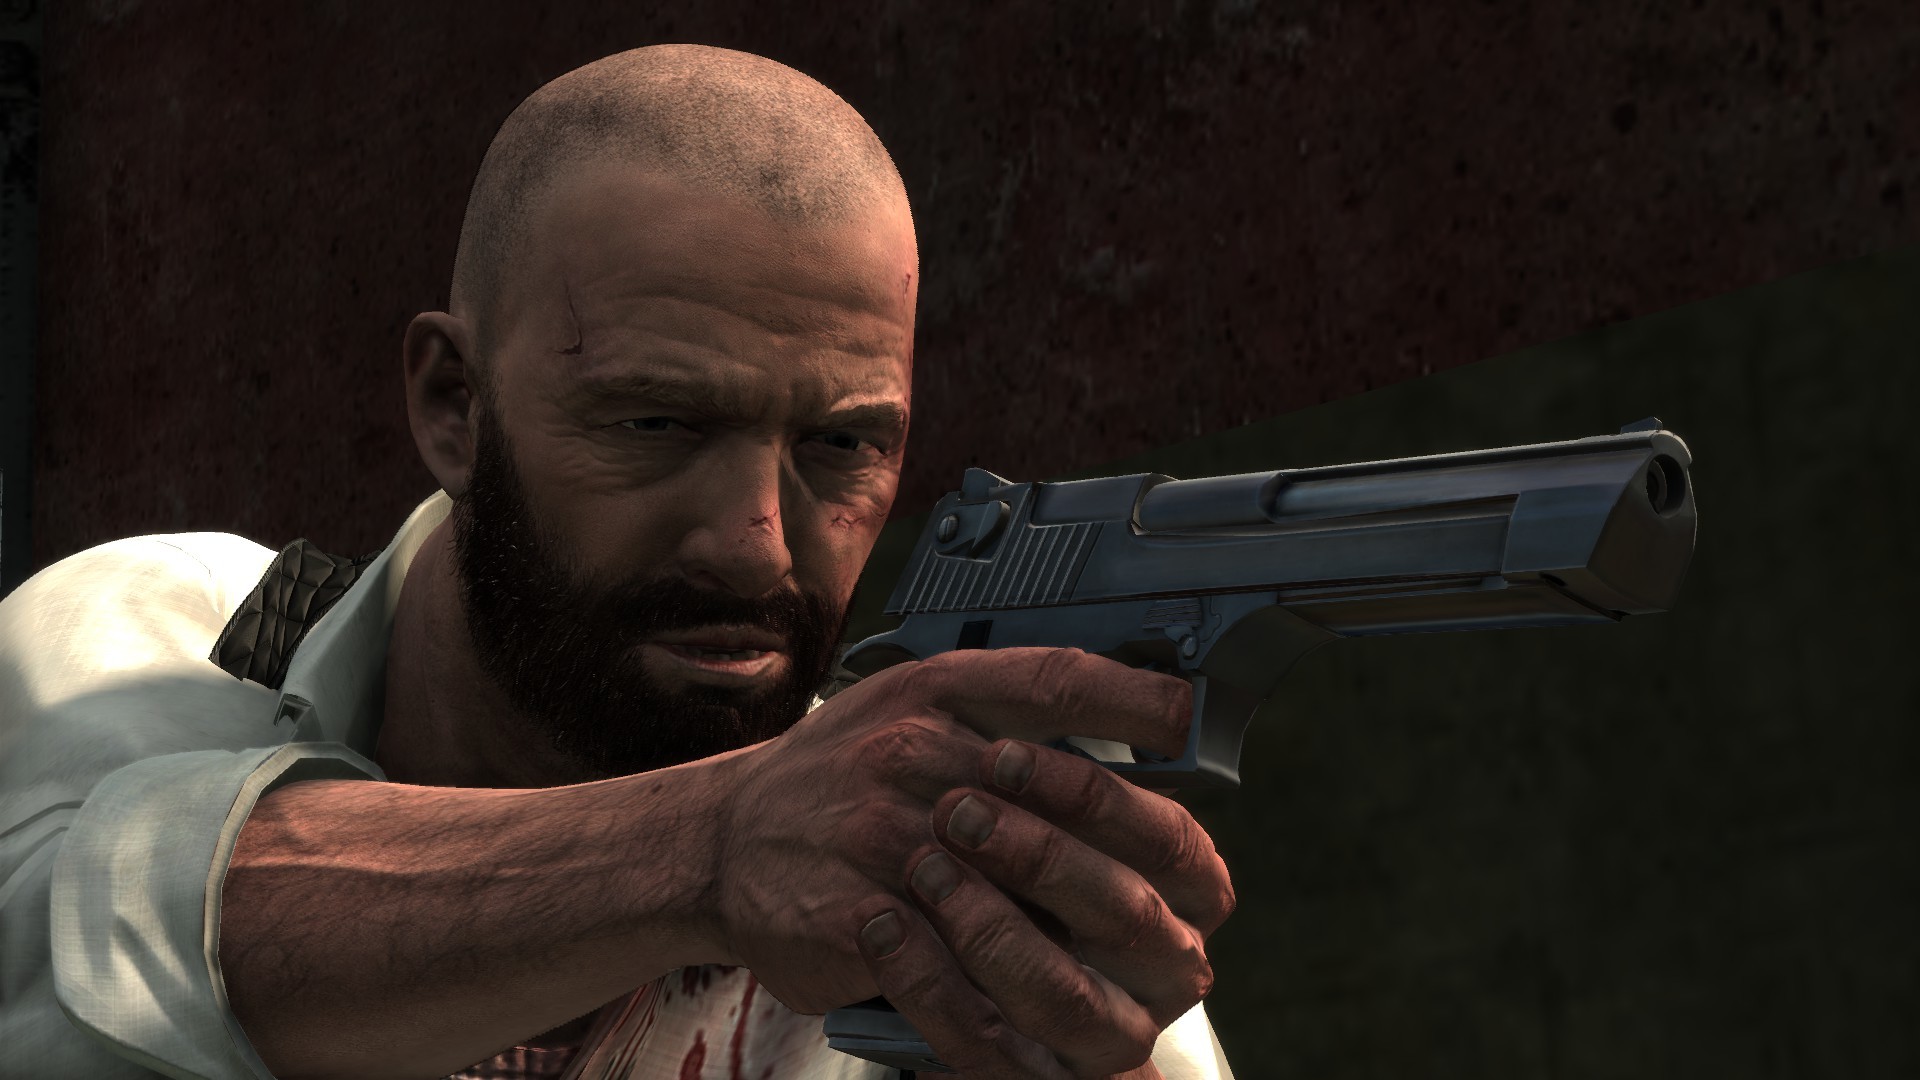 1920x1080 Max Payne with a gun, from Max Payne 3.